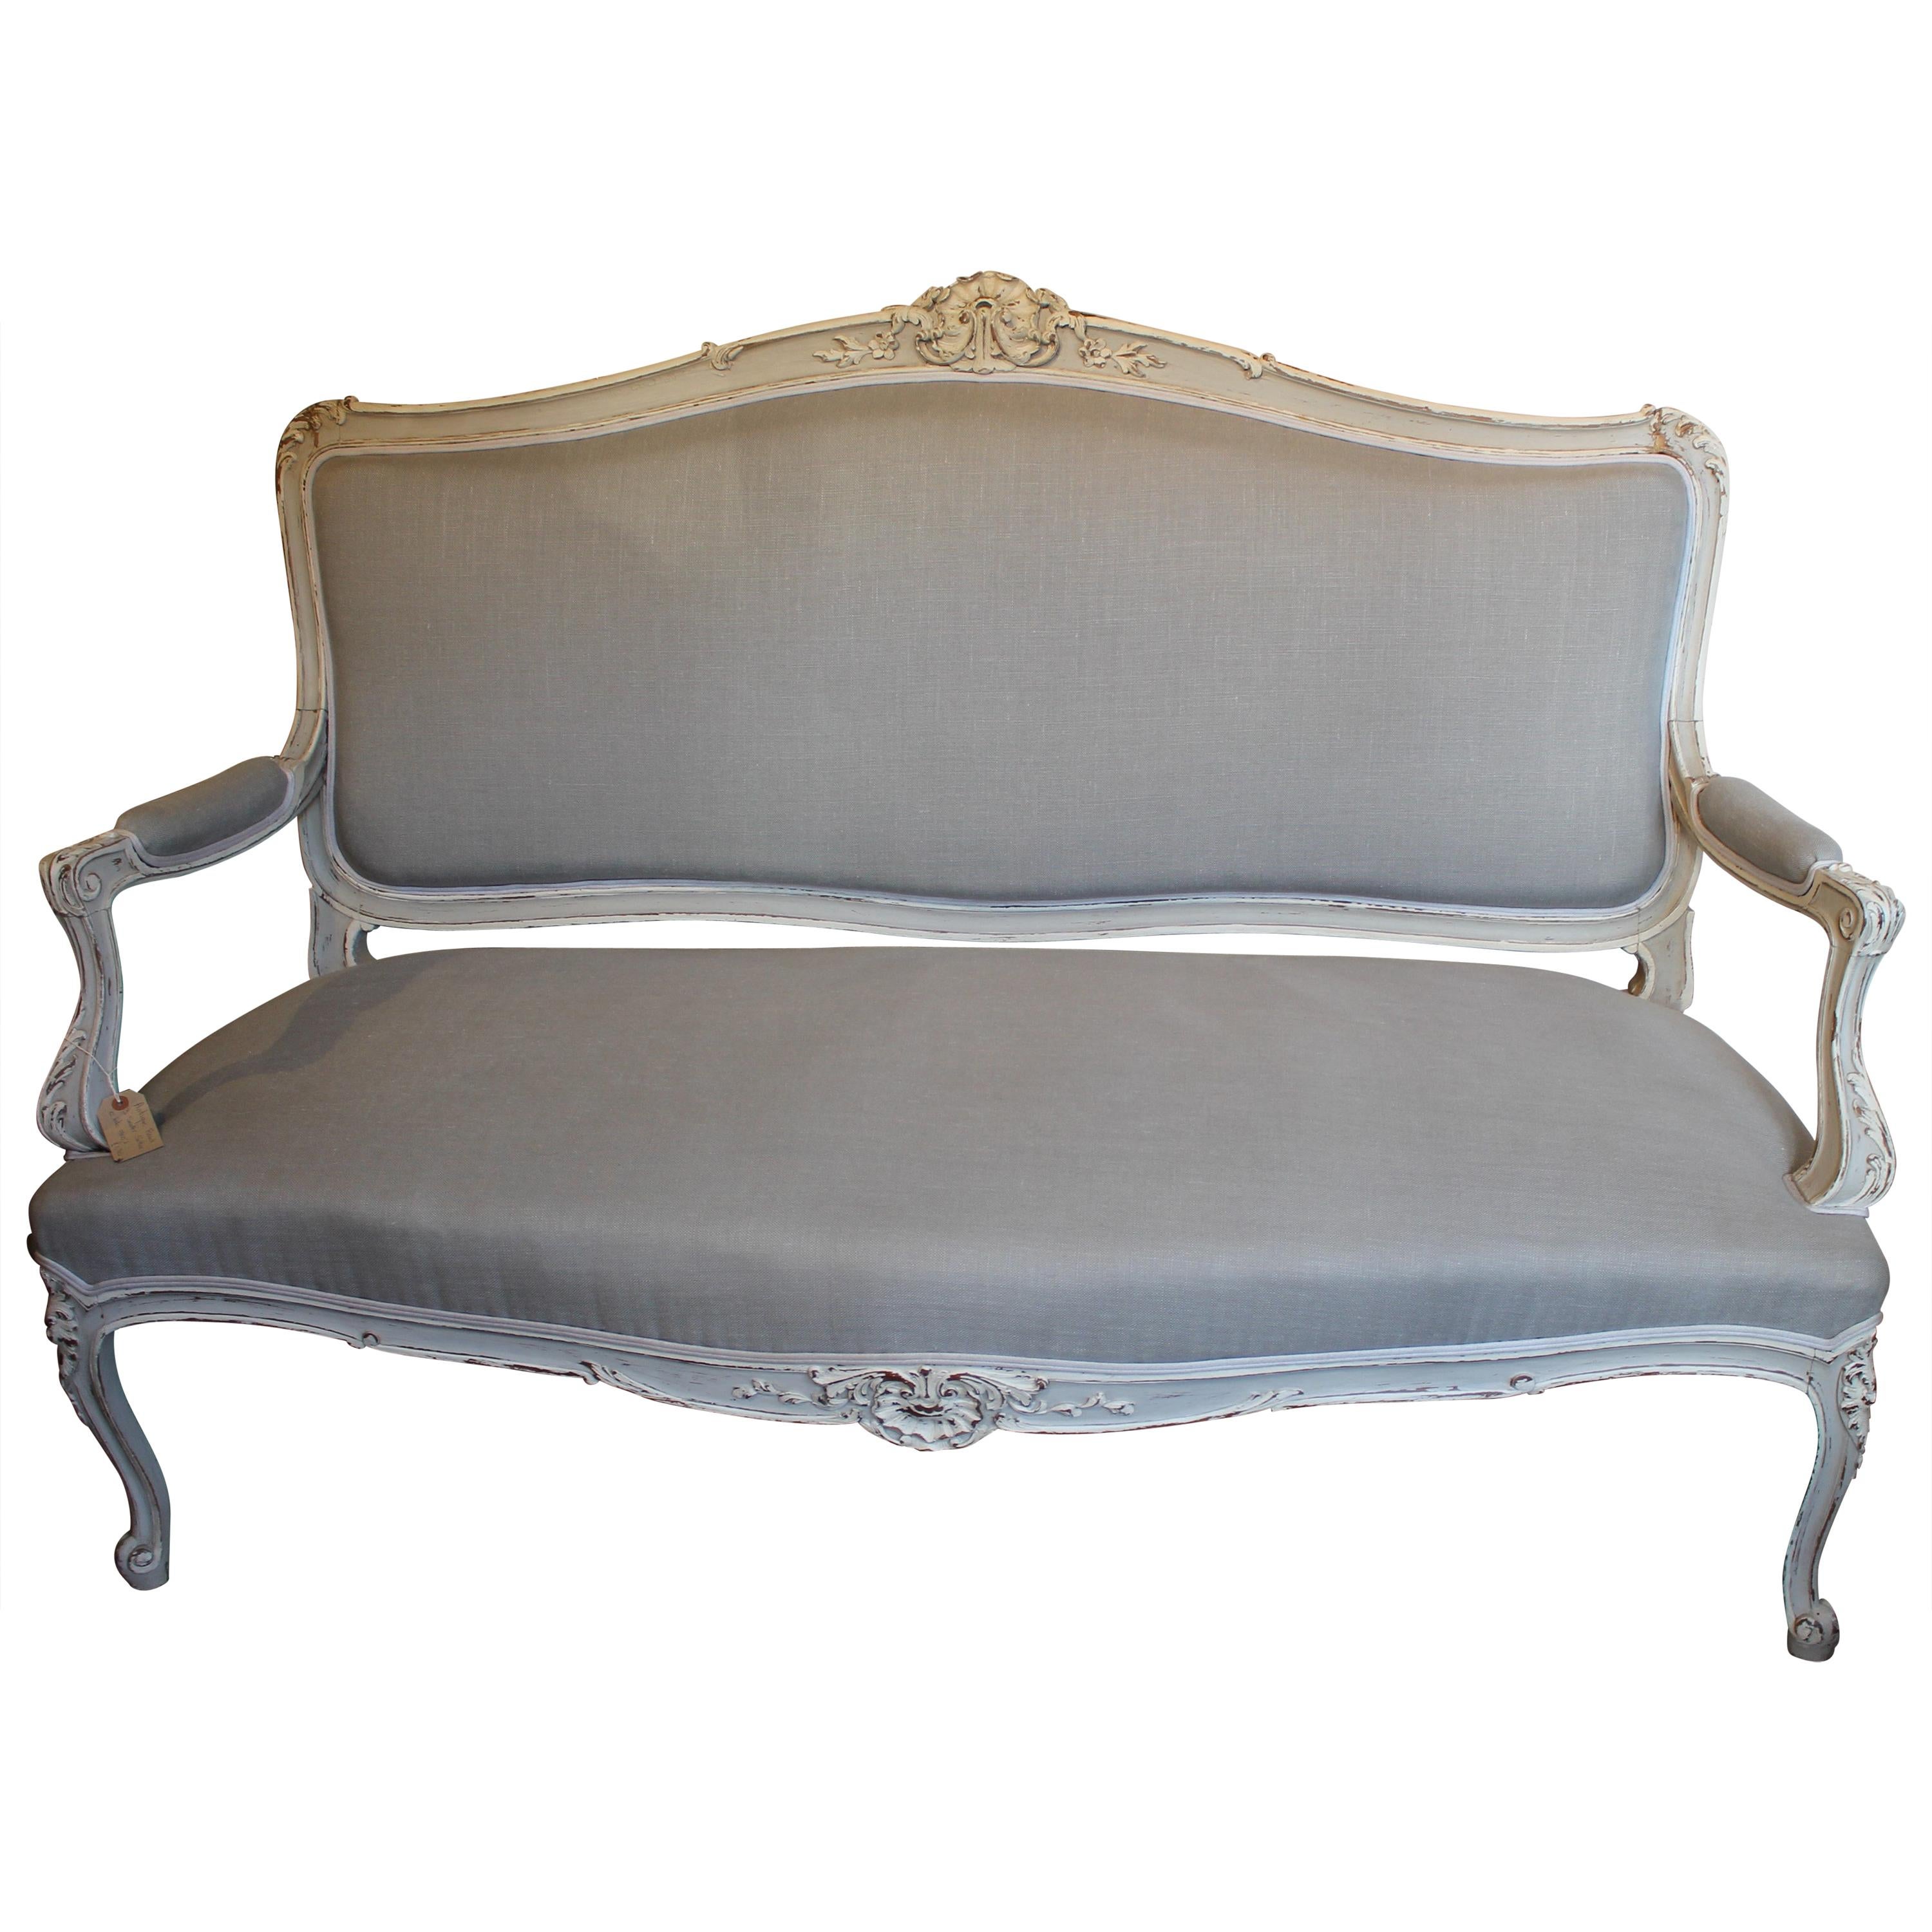 Re-Upholstered Antique Large French Carved Painted 3-Seat Canapé or Sofa For Sale